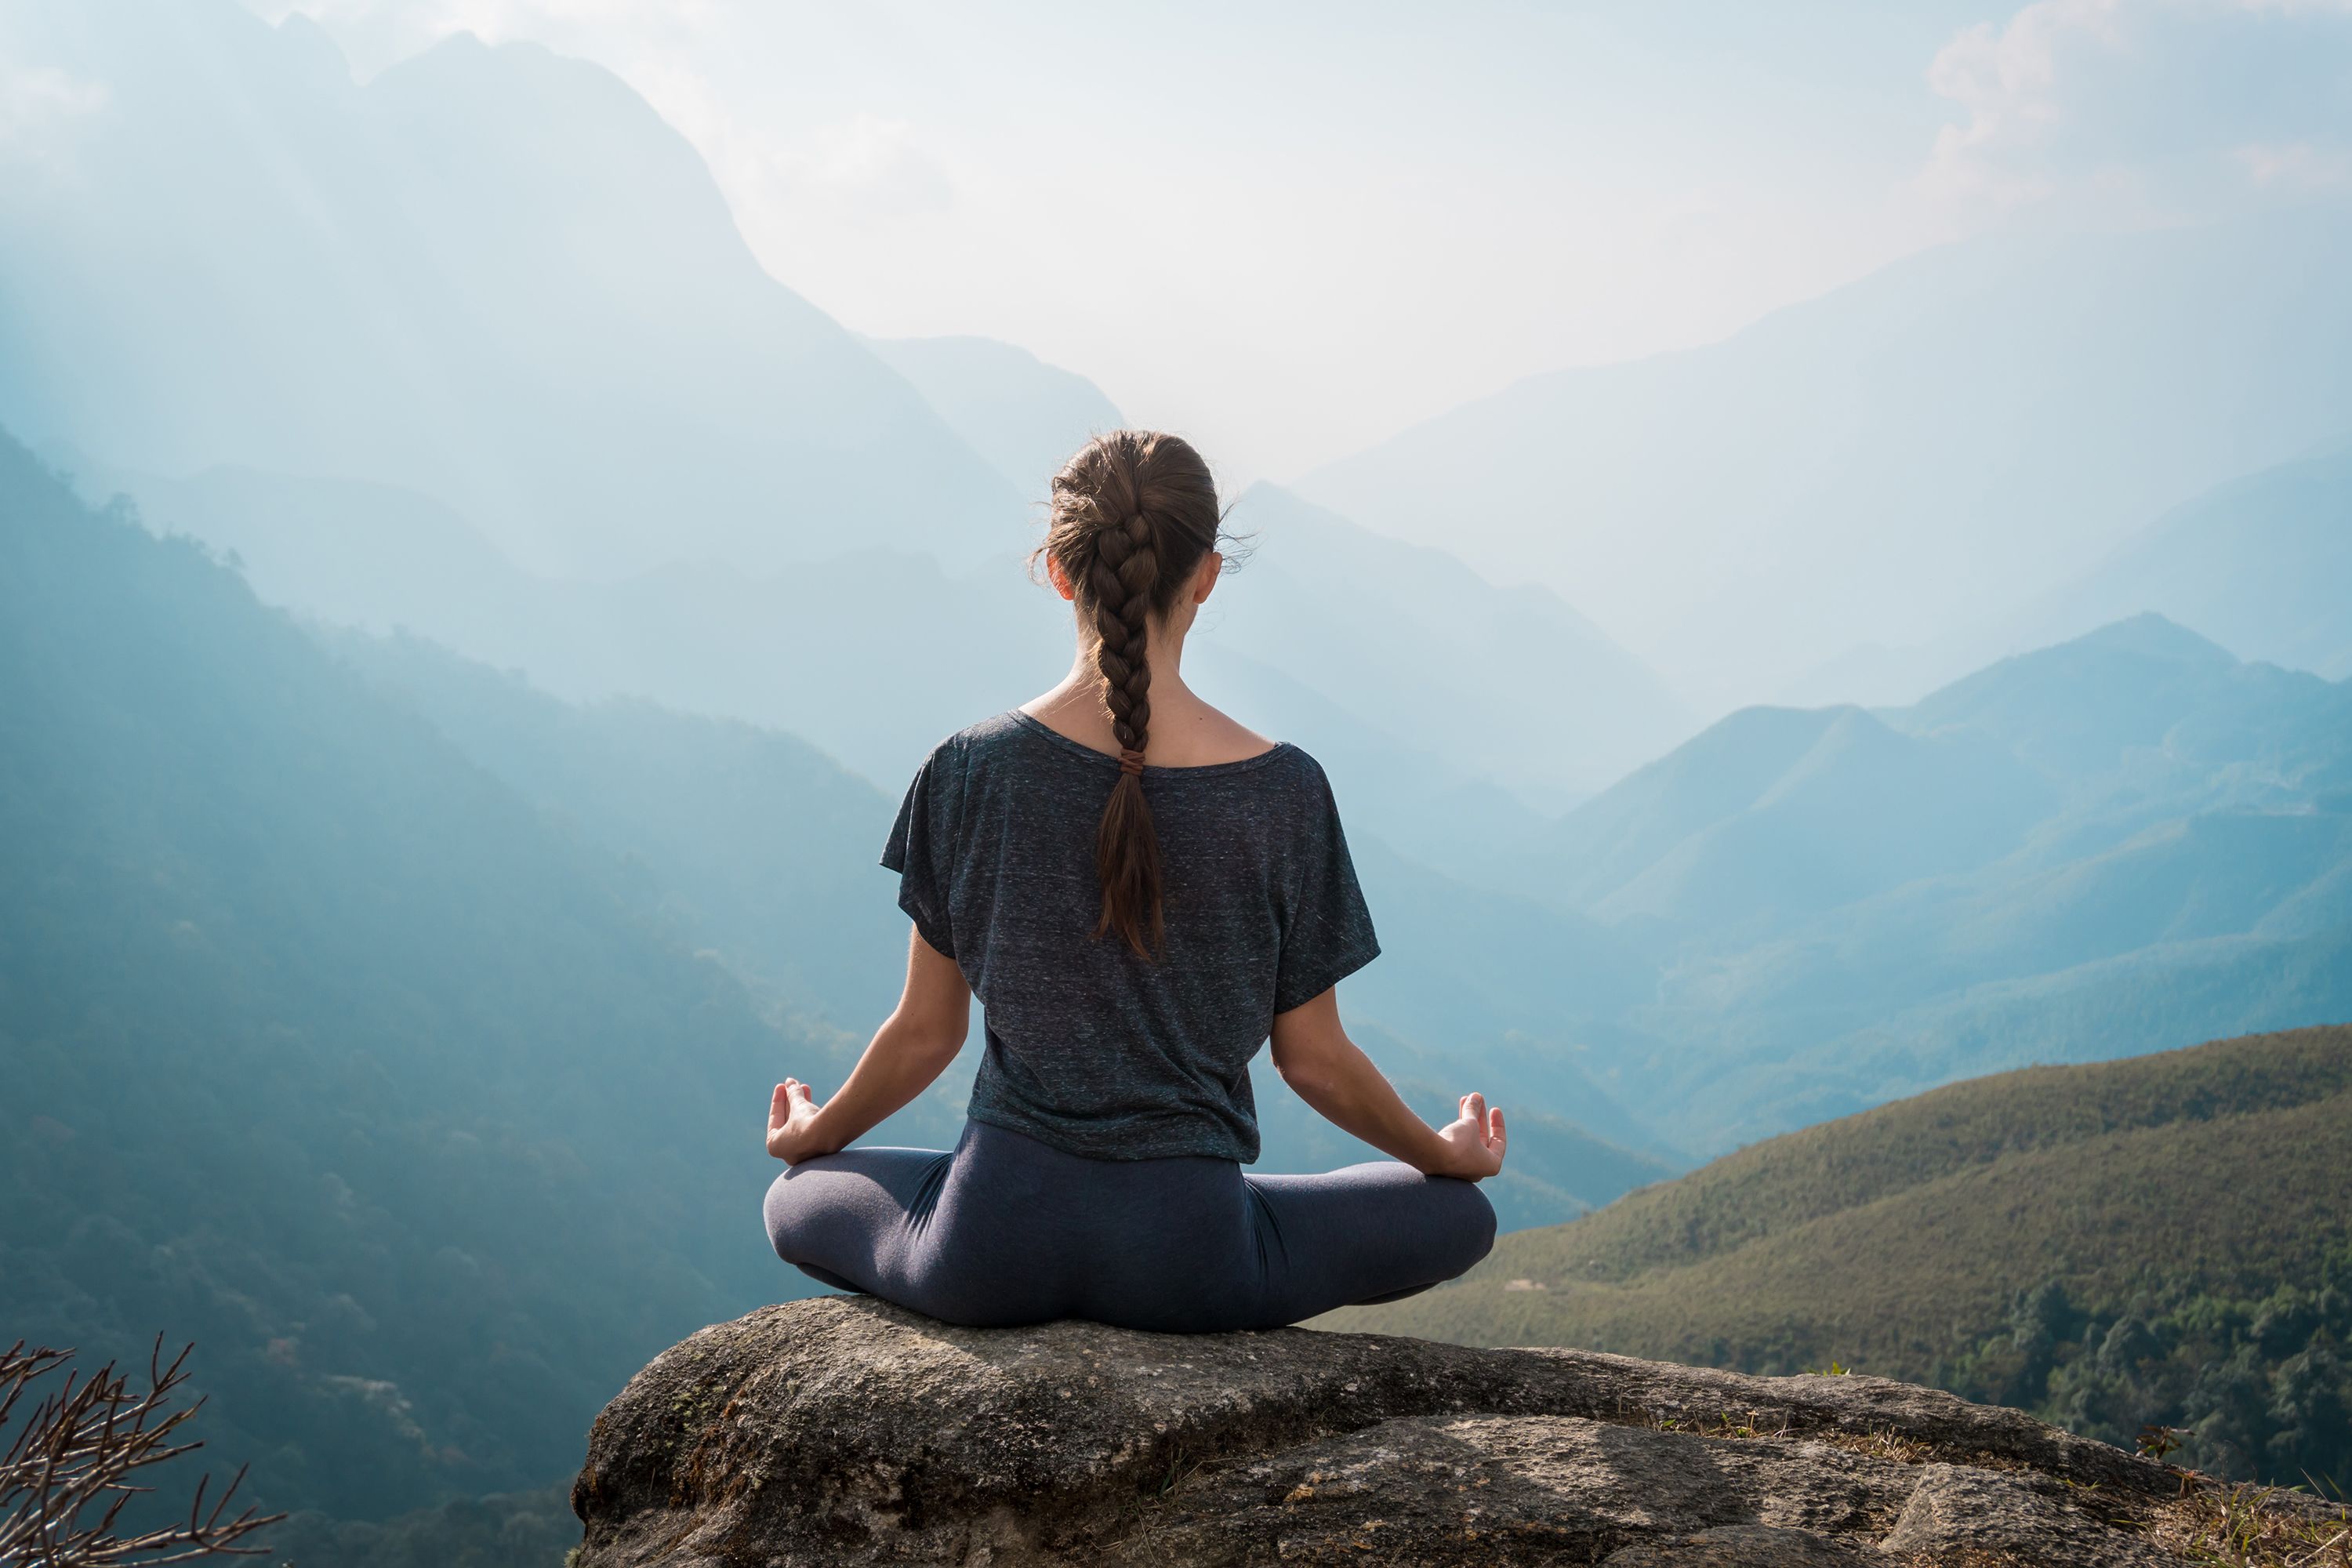 What to know if you want to start meditating, according to experts